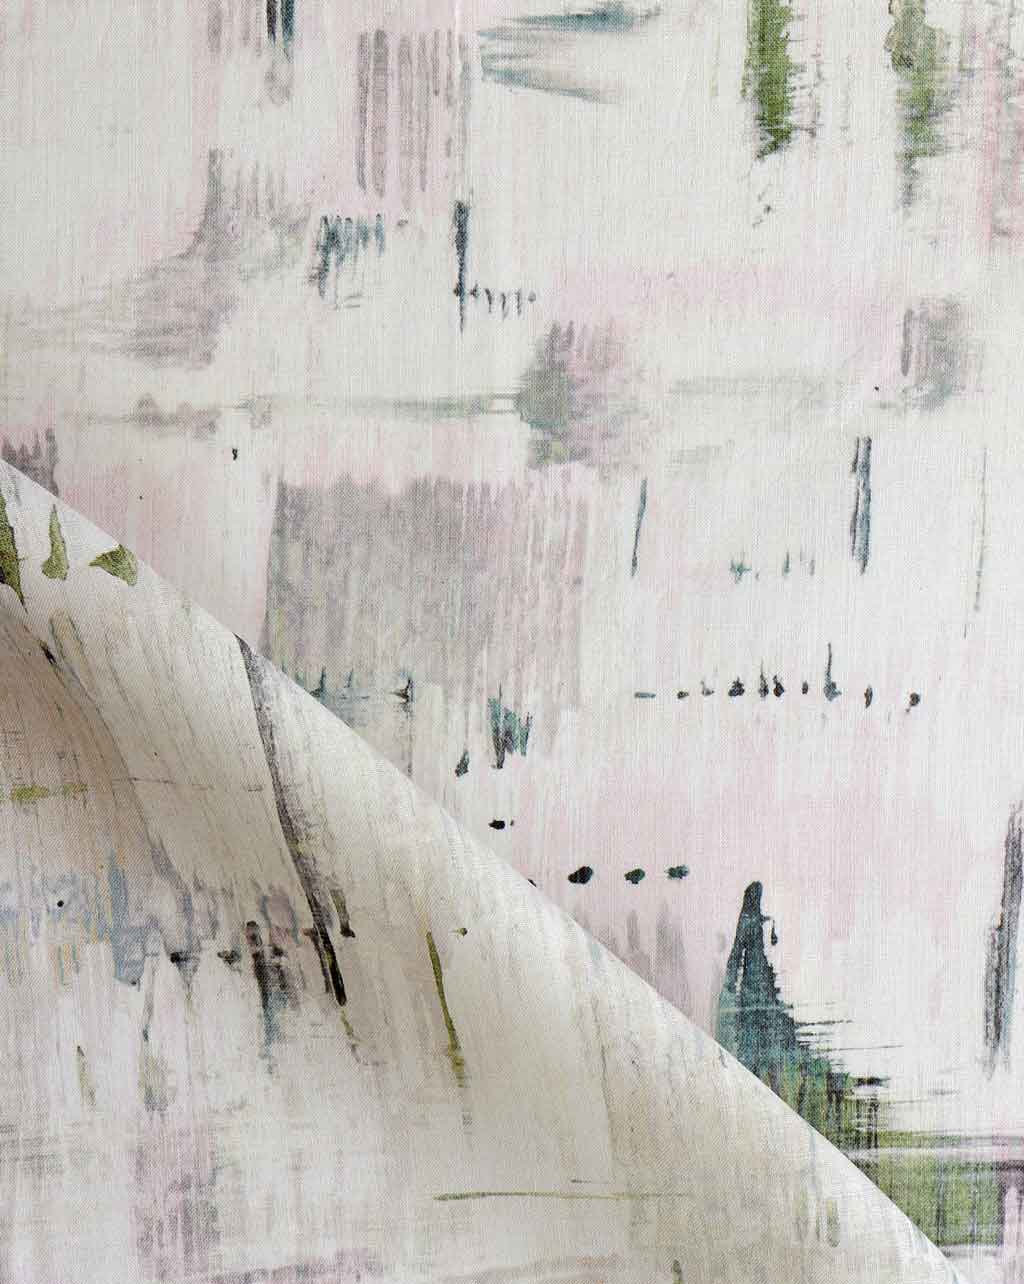 A close up of an abstract painting on a pink and green Cherifia Fabric or Duomo.